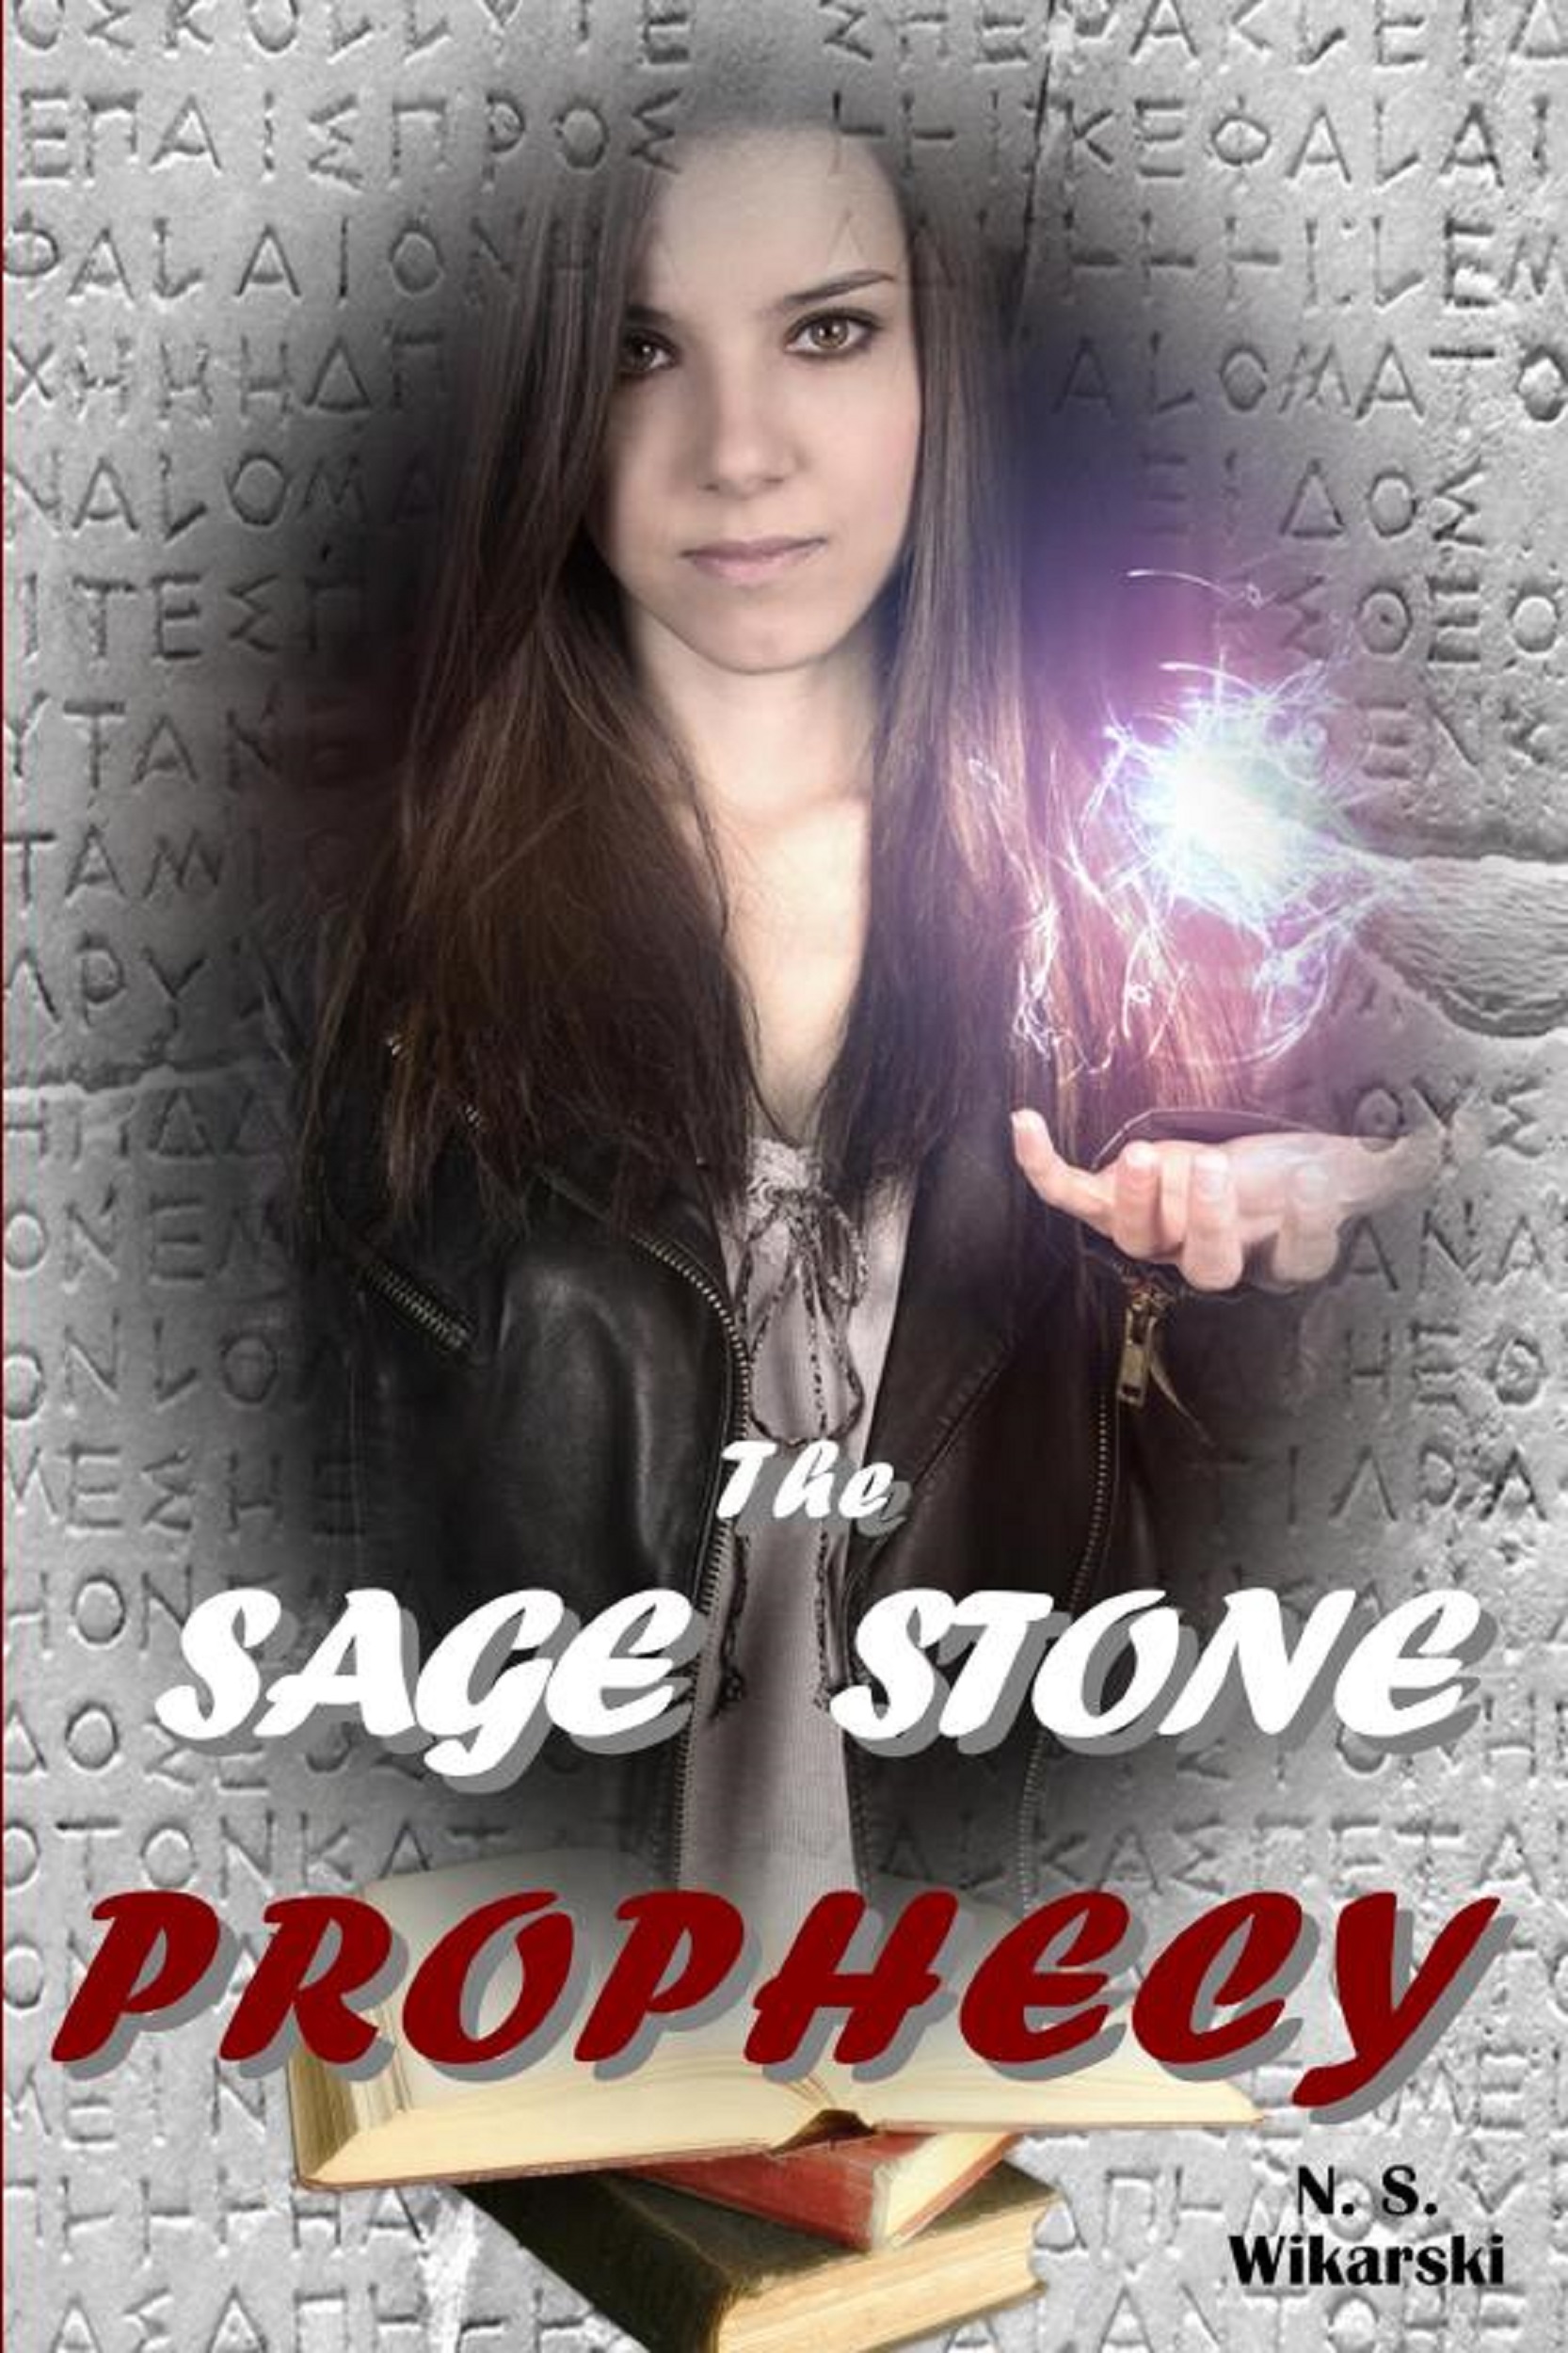 the-stone-sage-prophecy-cover